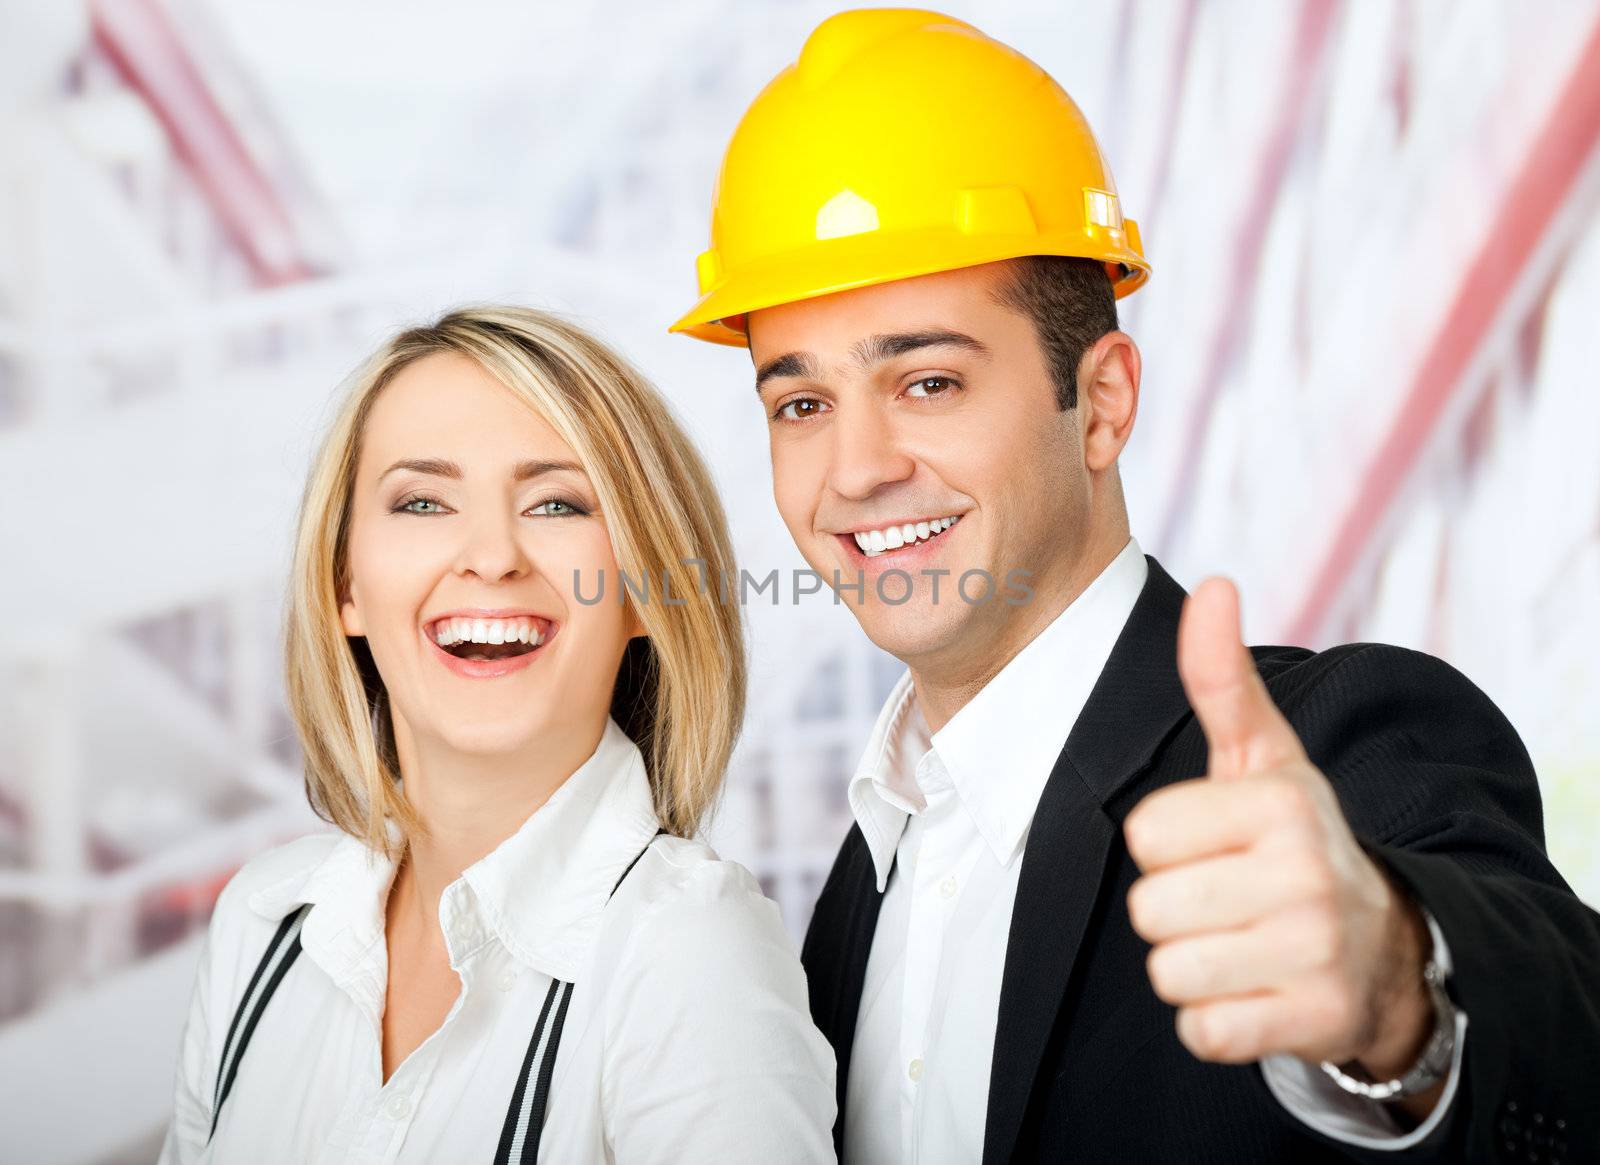 Male and female architects smiling at camera, man wearing hardhat and showing thumbs up